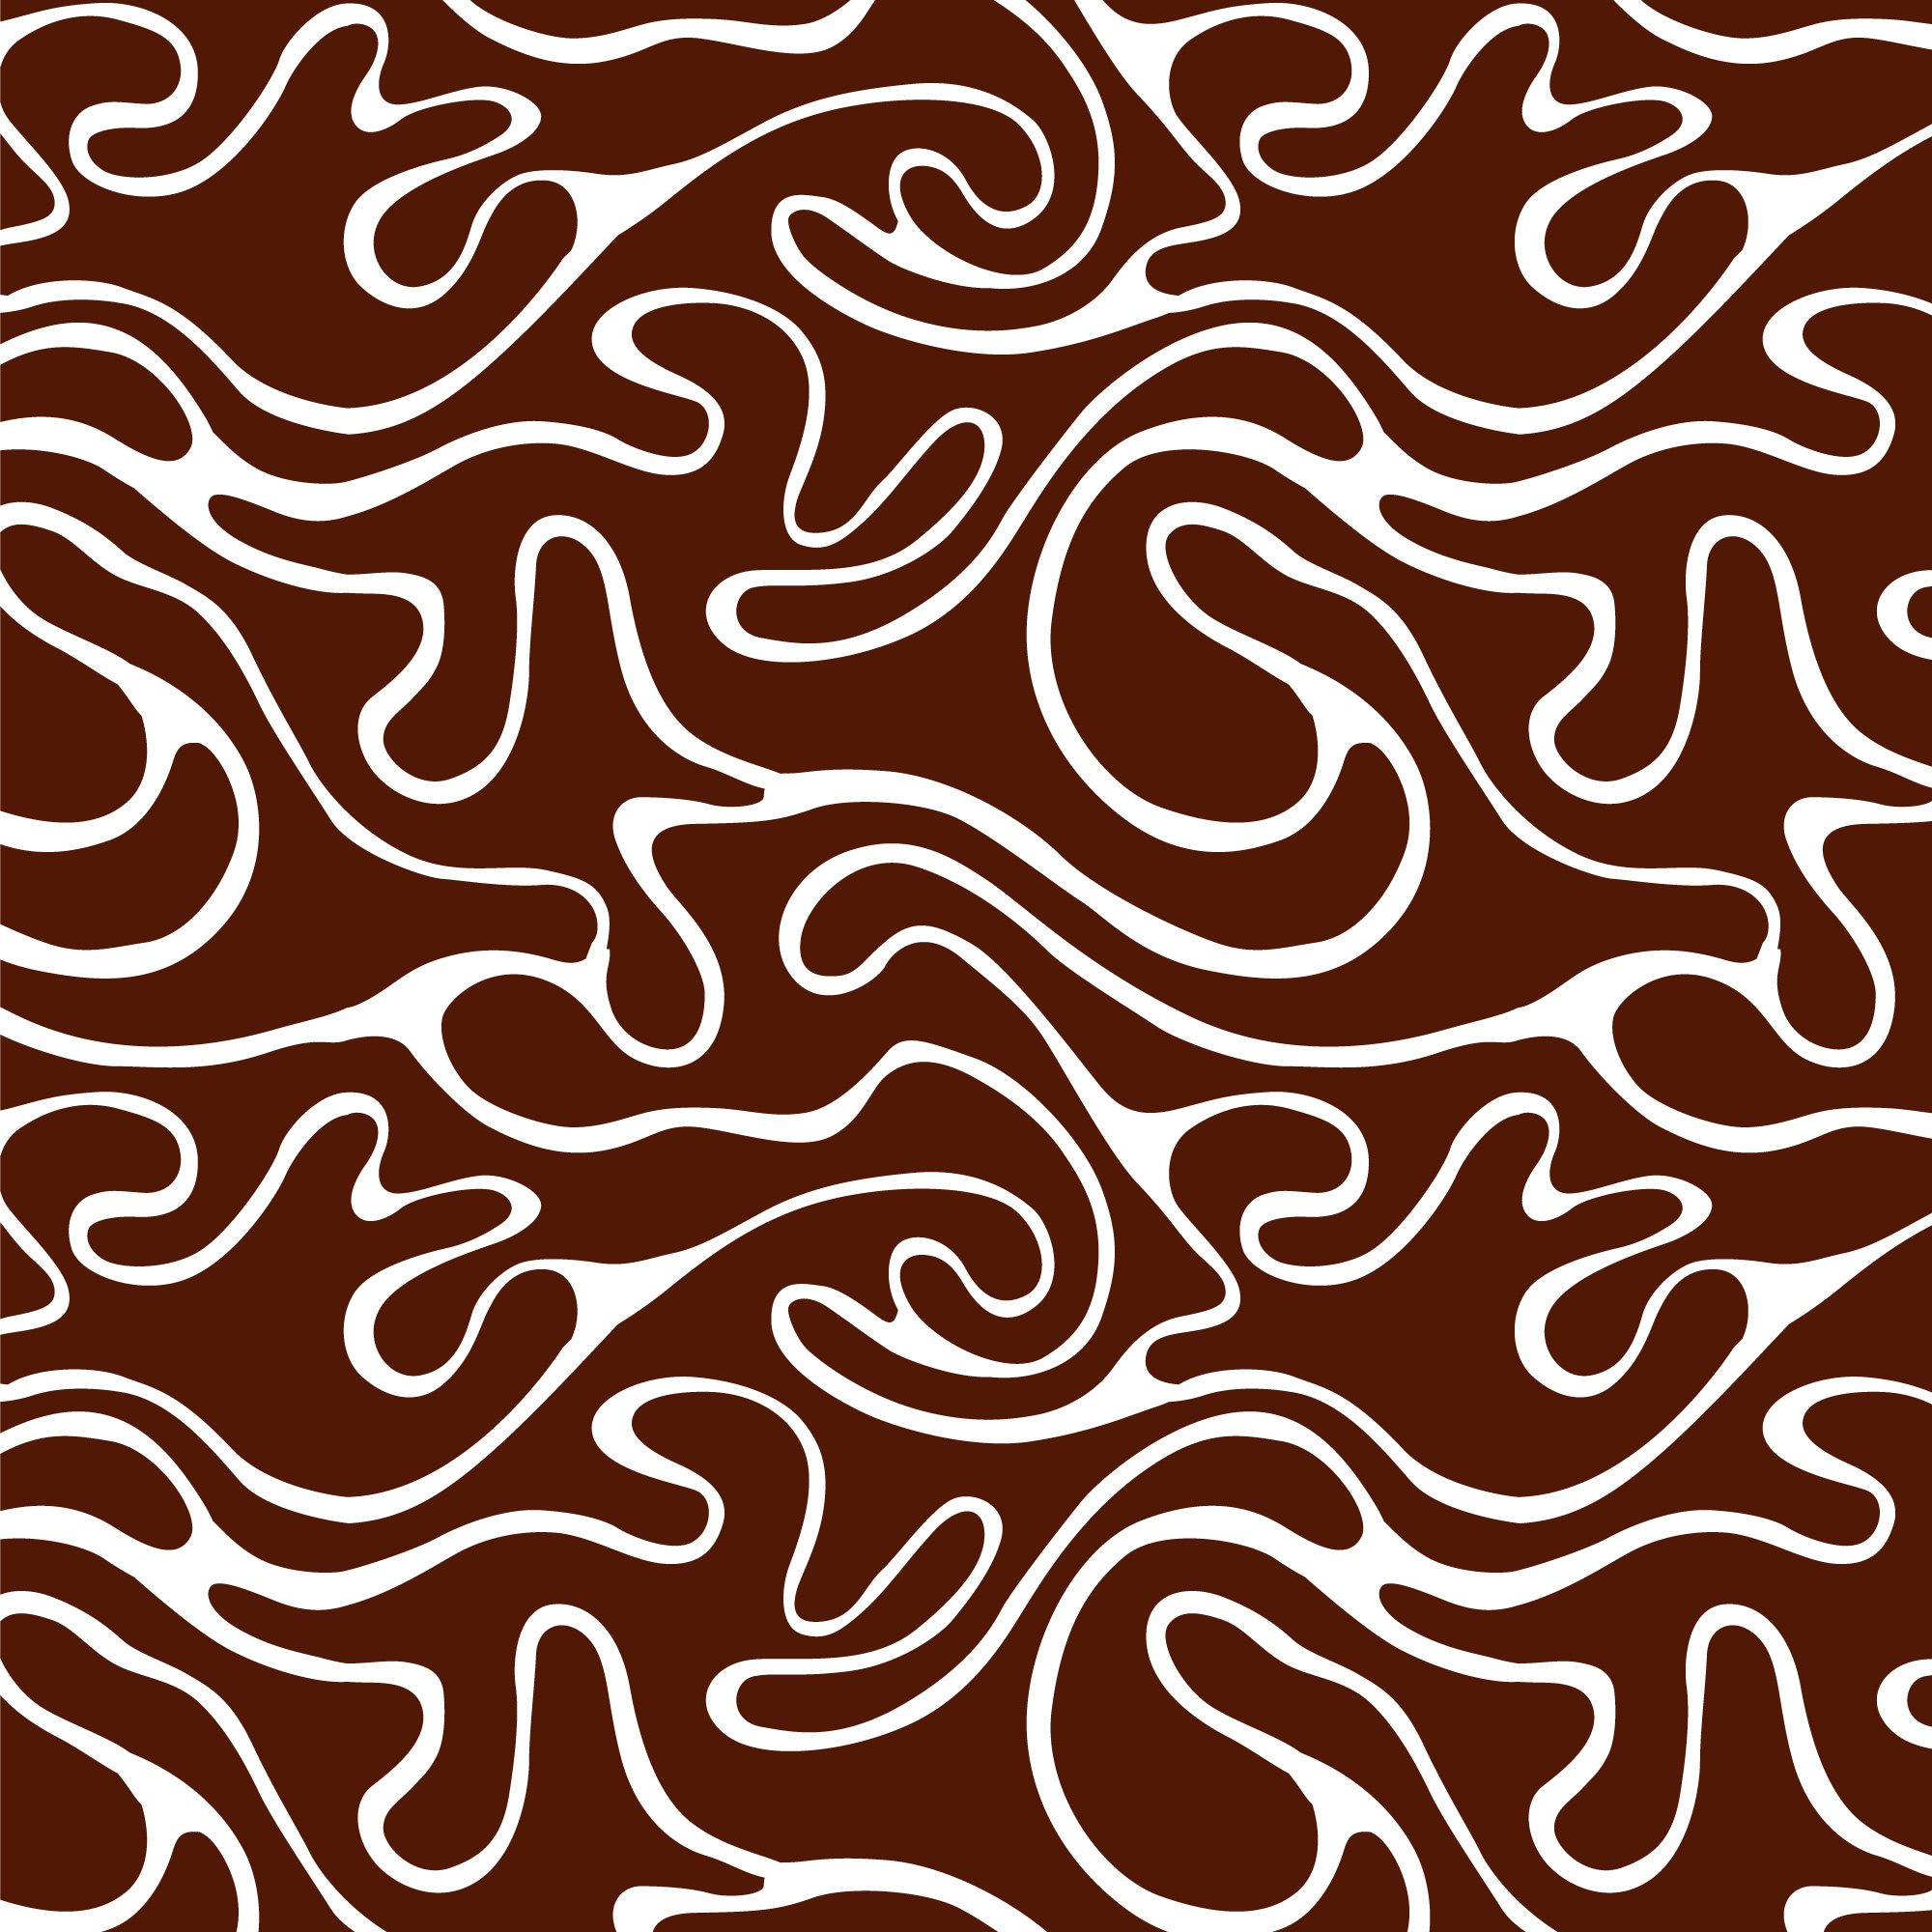 Brown and white pattern with wavy lines.